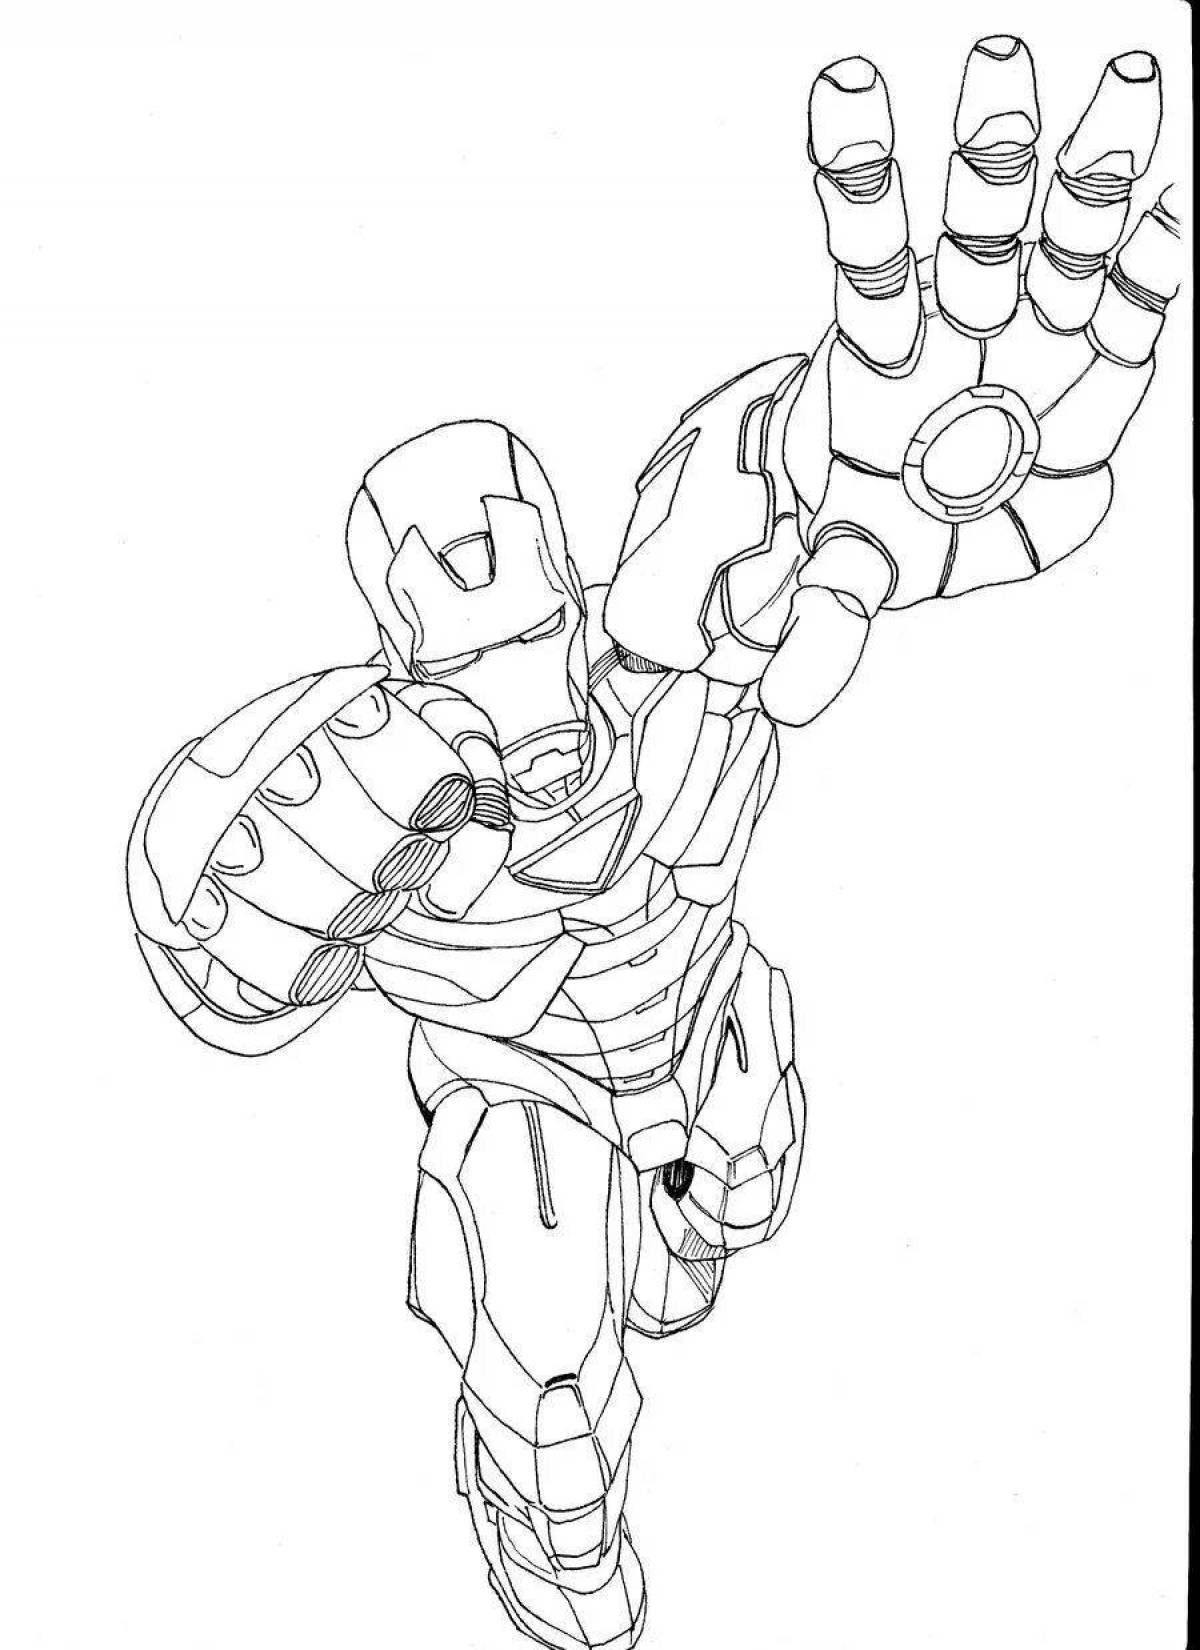 Outstanding iron man for boys coloring book